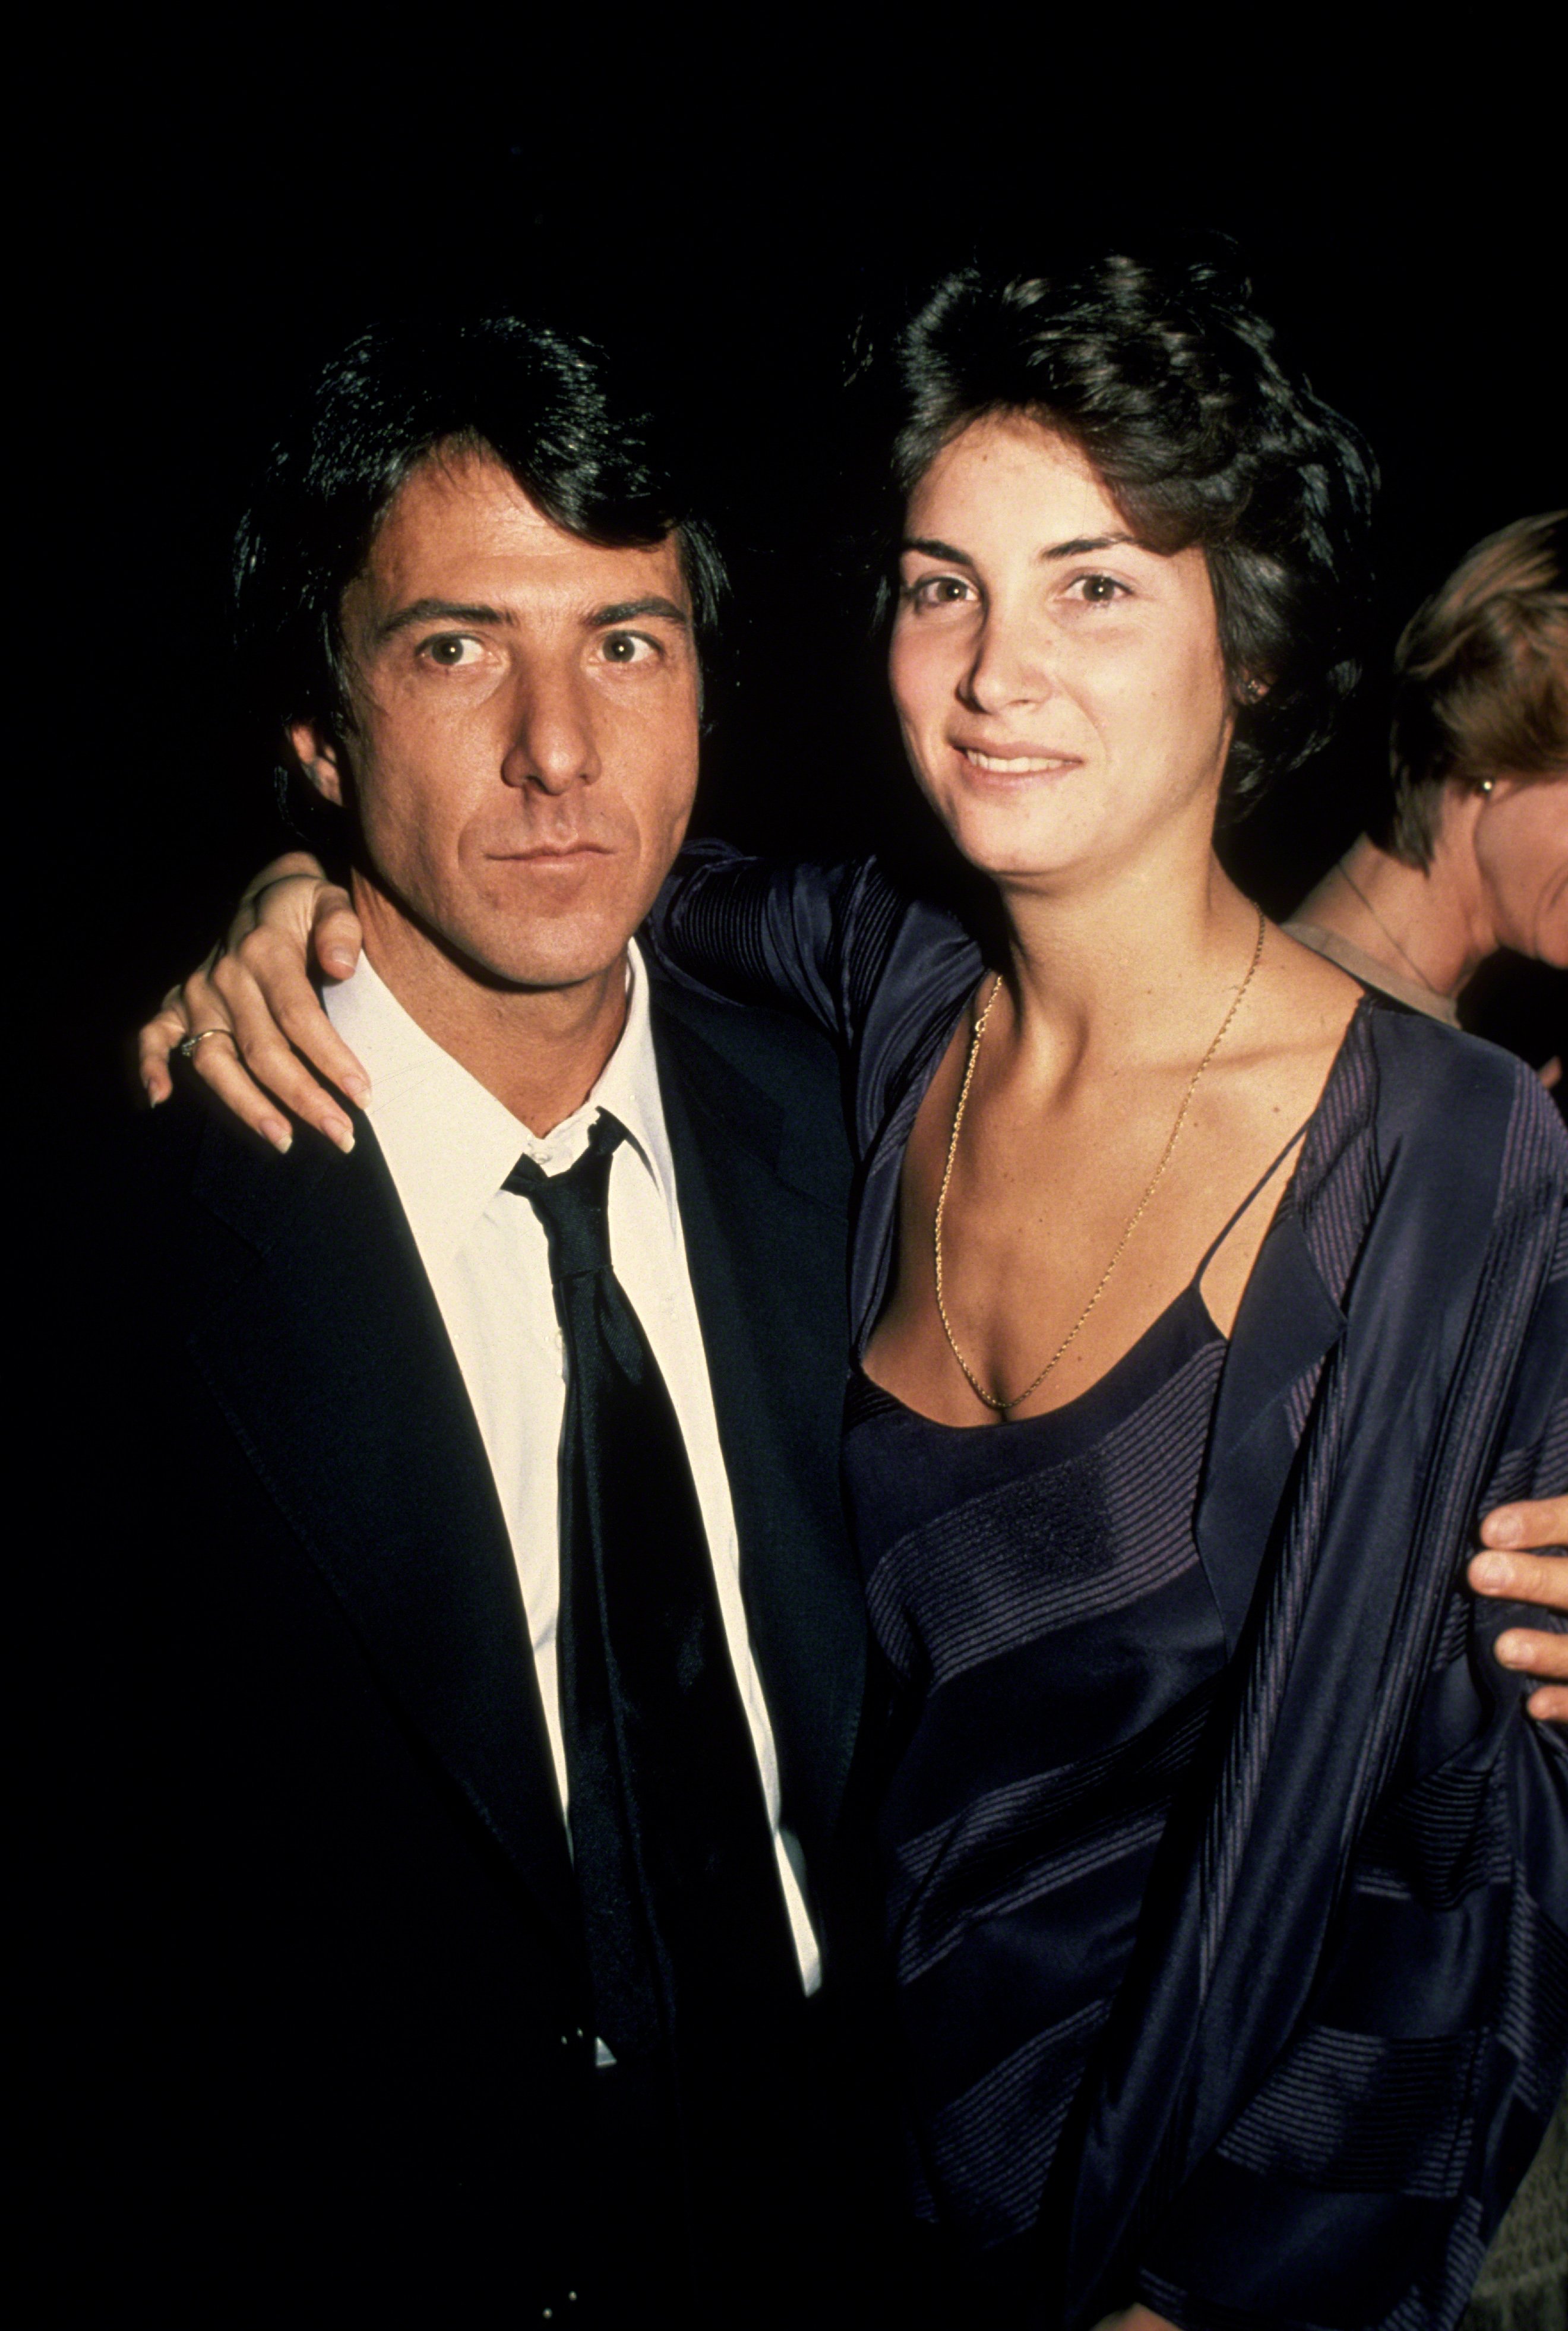 Dustin Hoffman and Lisa Gottsegen circa 1979 in New York City. | Source: Getty Images